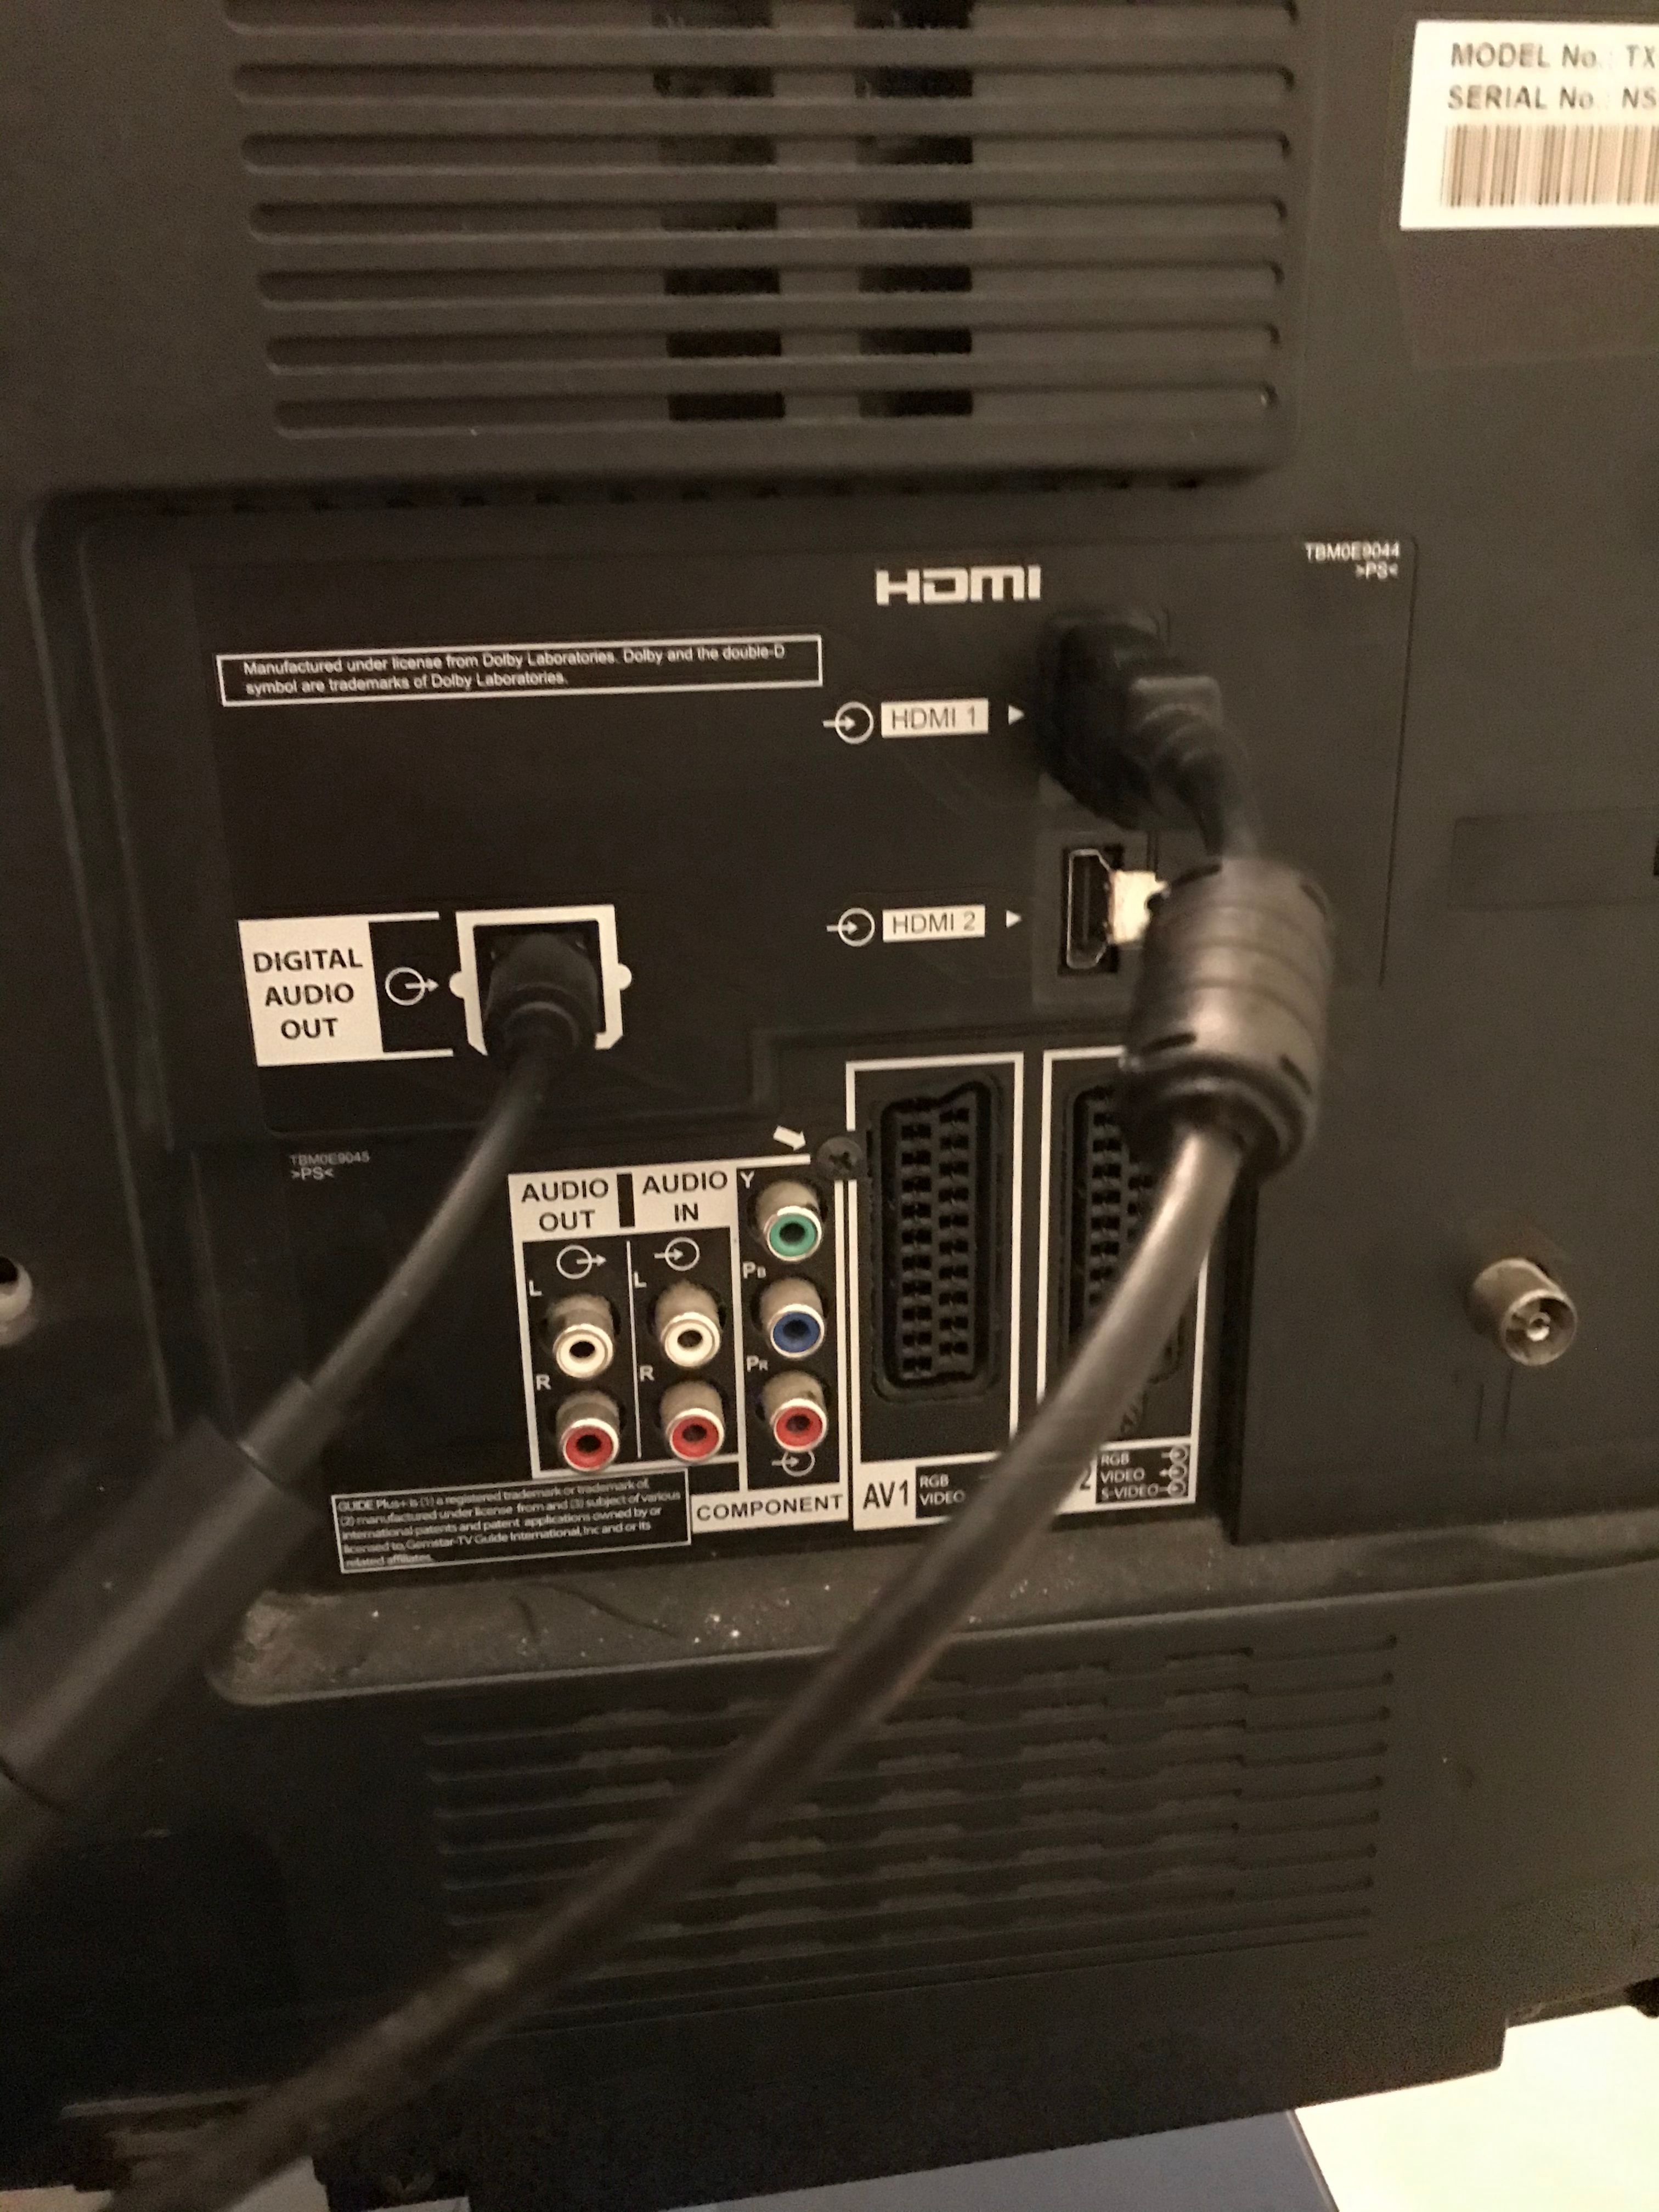 Connecting a Beam to a Panasonic TV 